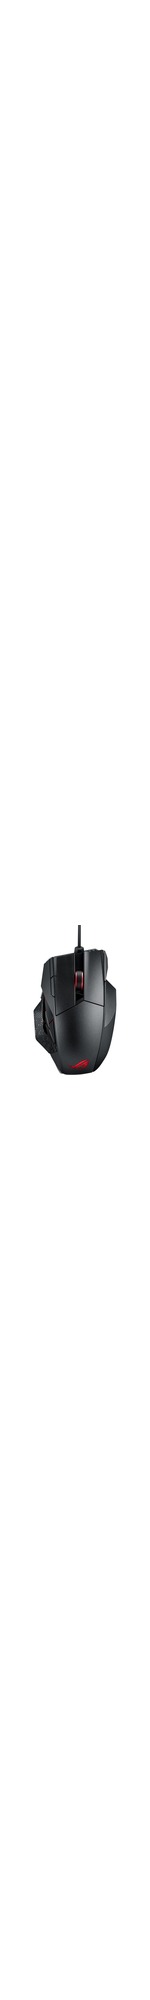 ASUS ROG Spatha Mouse - Laser - Cable/Wireless - 12 Buttons - Titanium Black